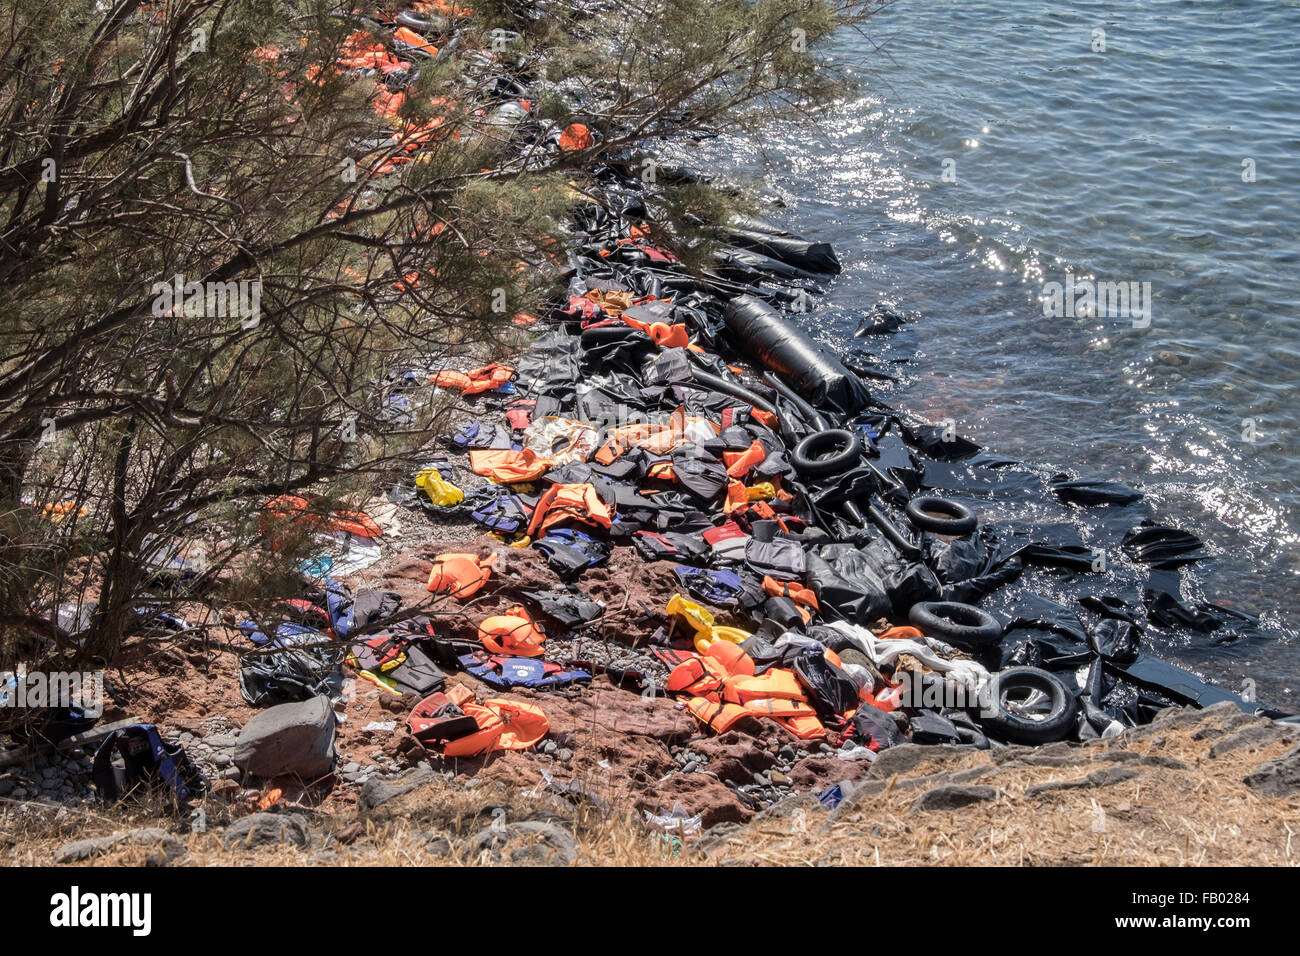 Life vests, deflated rafts and other detritus left behind by refugees crossing from Turkey to Lesvos, Greece. Stock Photo